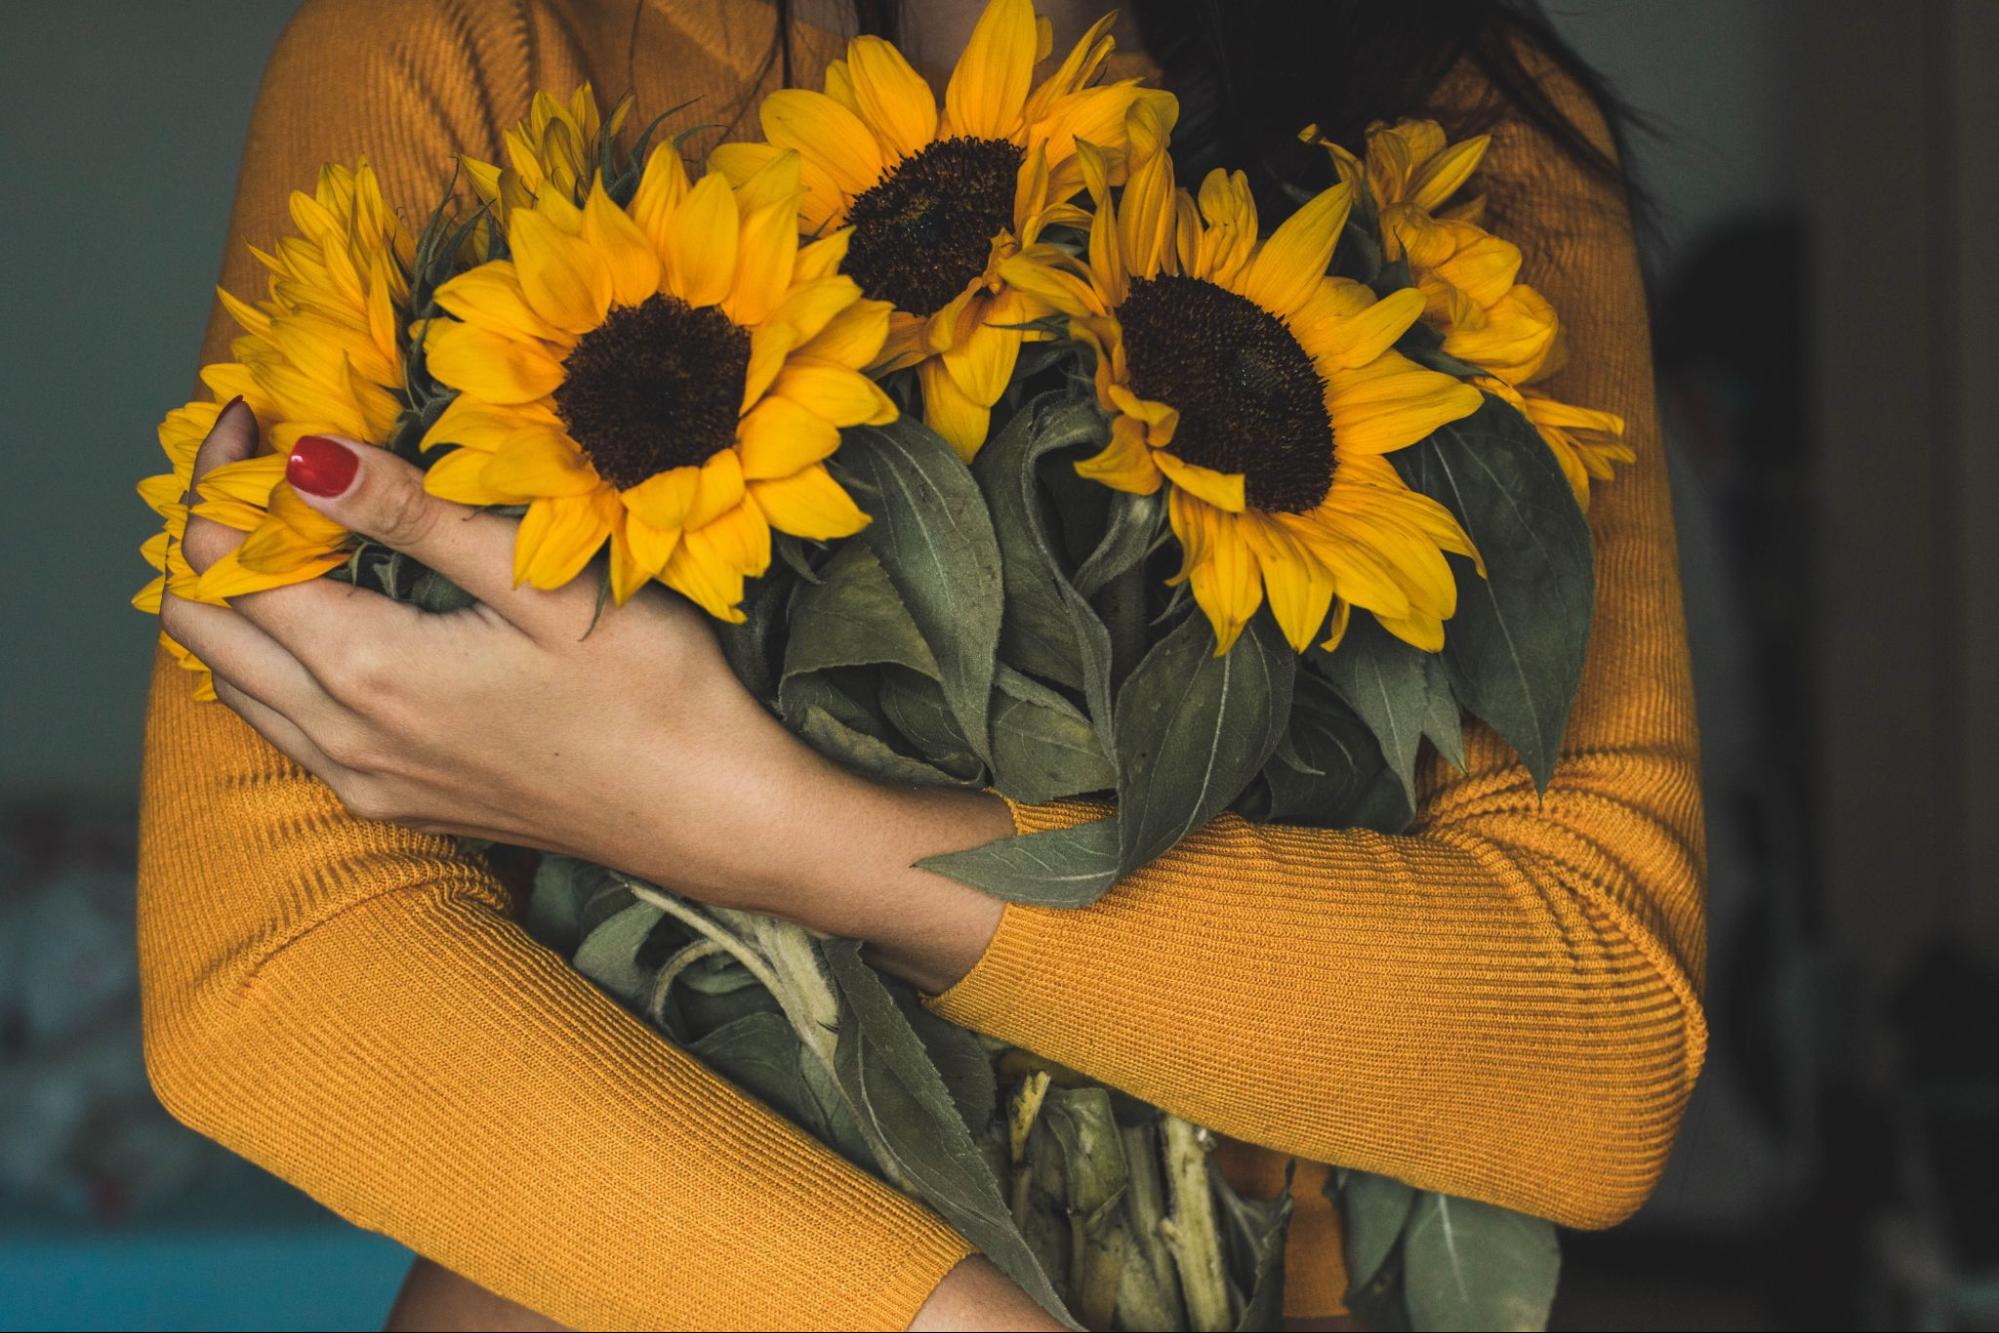 Sunflowers held in arms